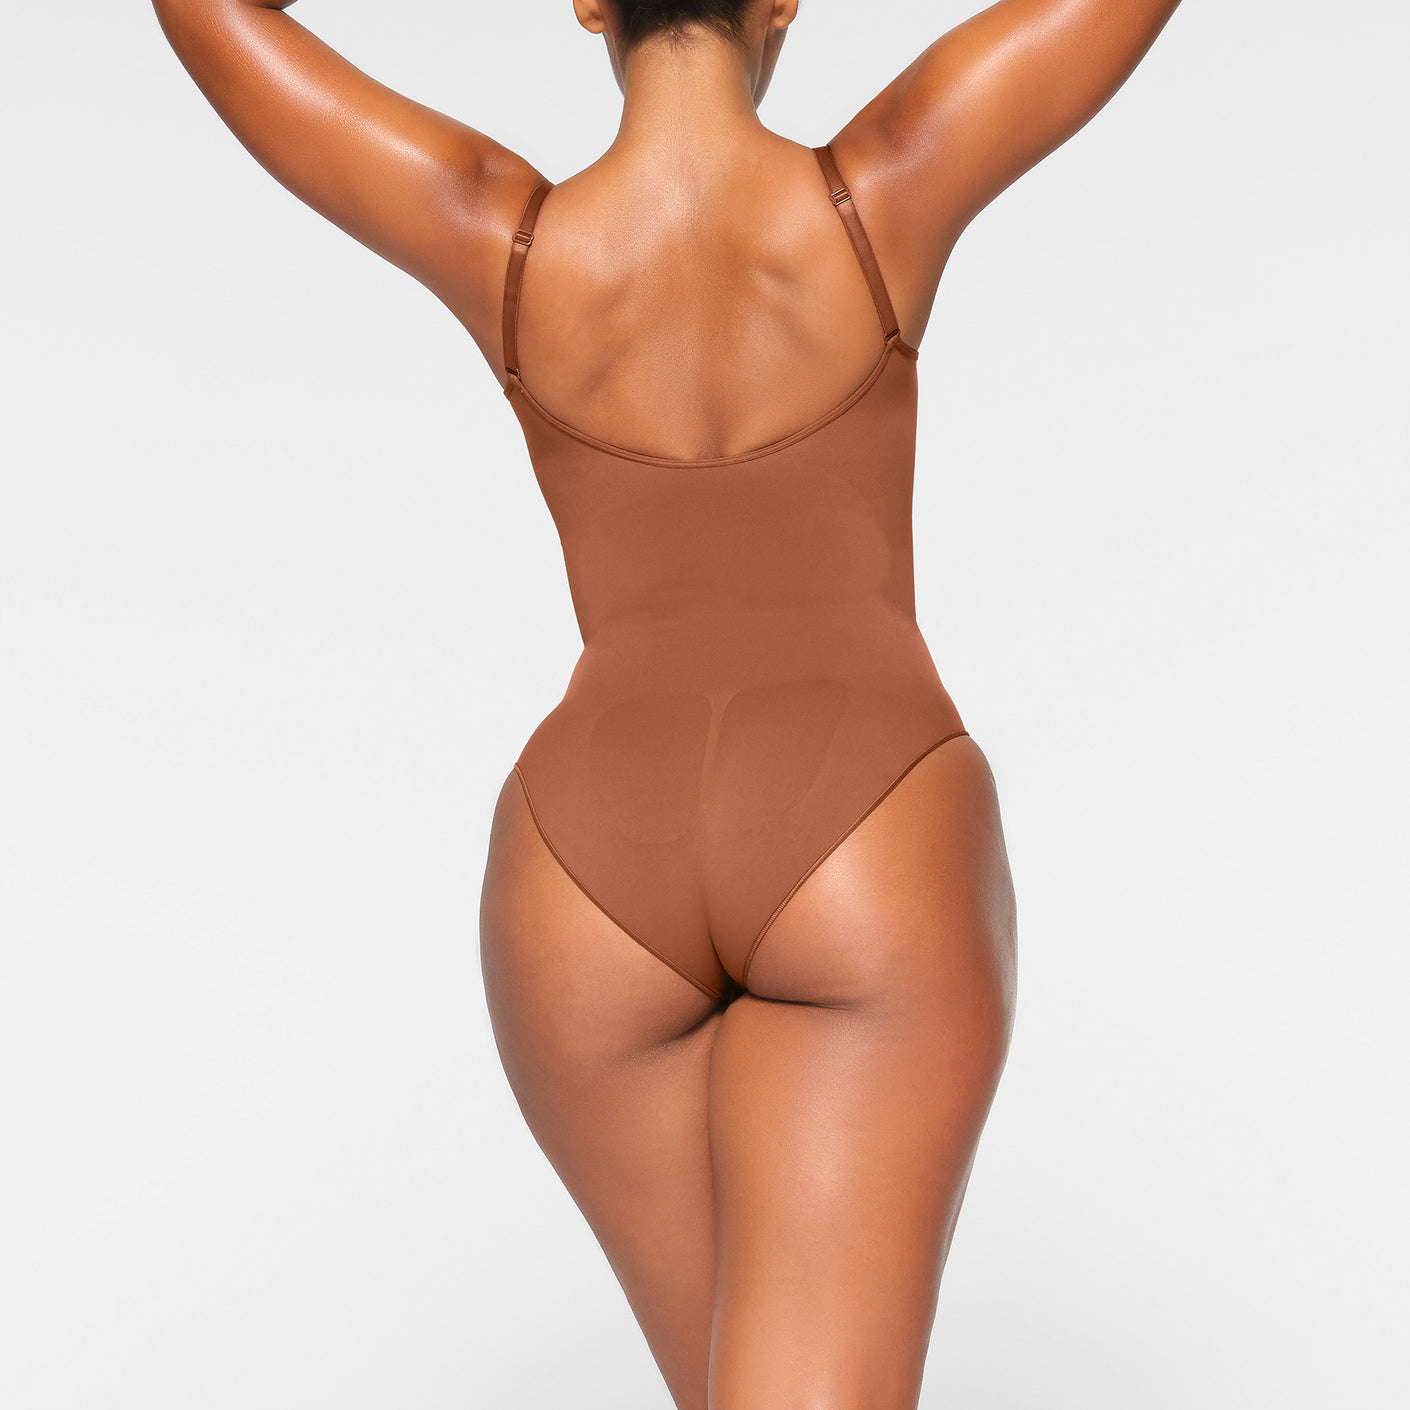 Made from ultra-smoothing and compressive material, SKIMS Essential  Bodysuits deliver a comfortable, second skin feel. Shop TOMORROW, JAN